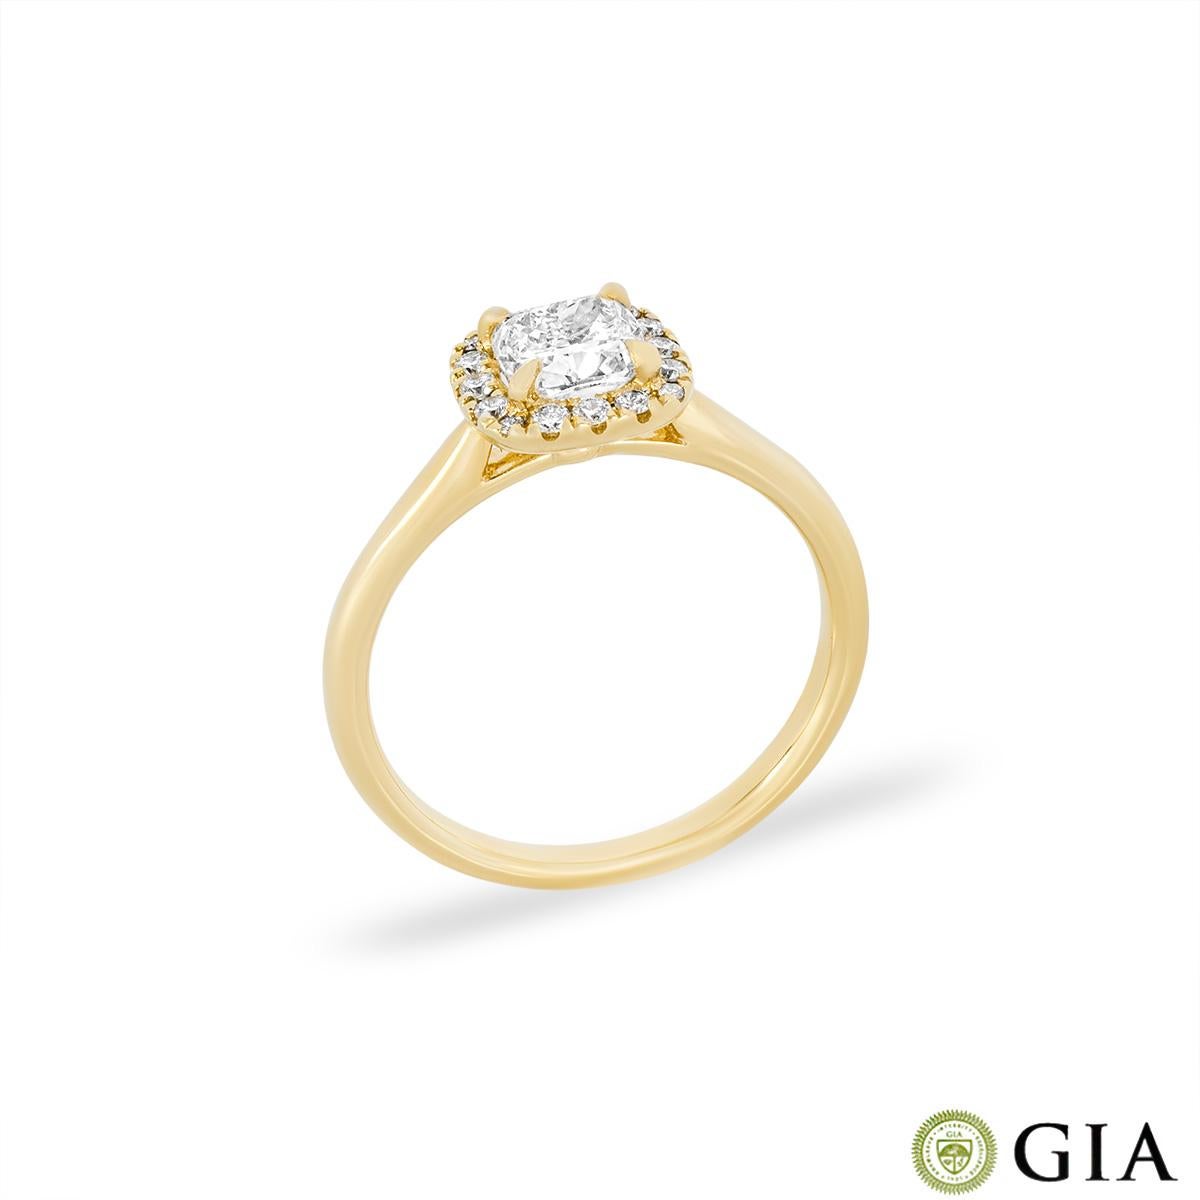 A gorgeous 18k yellow gold diamond halo engagement ring. The ring features a cushion cut diamond set to the centre weighing 0.71ct, I colour and SI1 clarity. The ring is further complemented with a halo made of 16 round brilliant cut diamonds